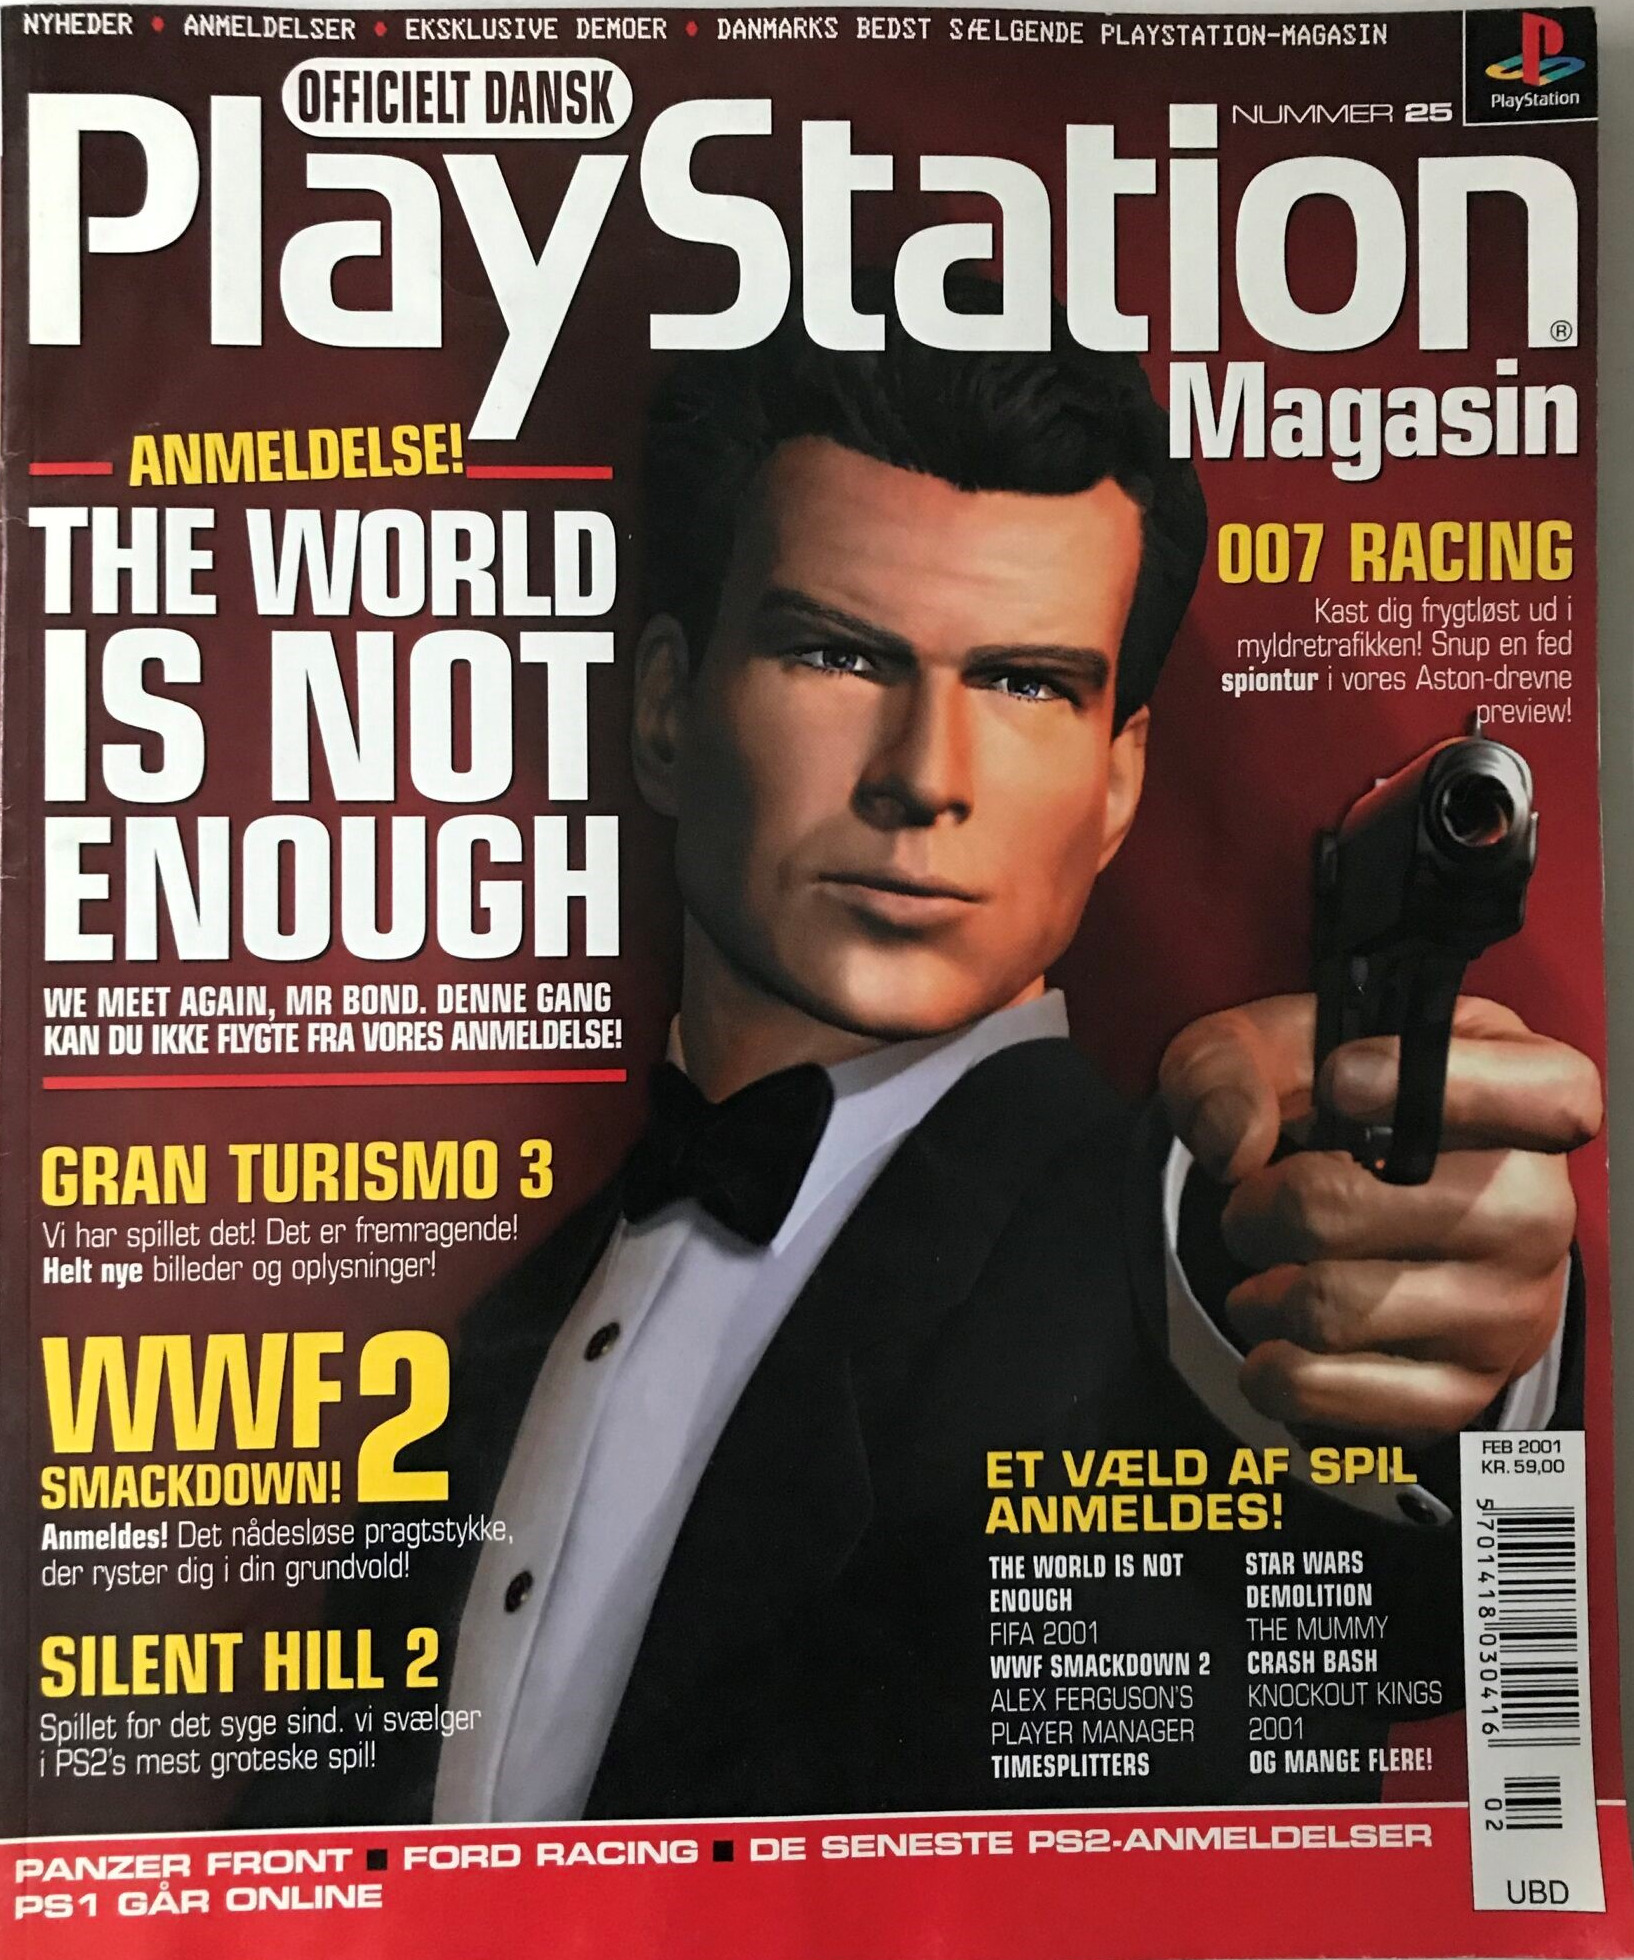 The World Is Not Enough, Playstation, FIFA 2001, Pierce Brosnan